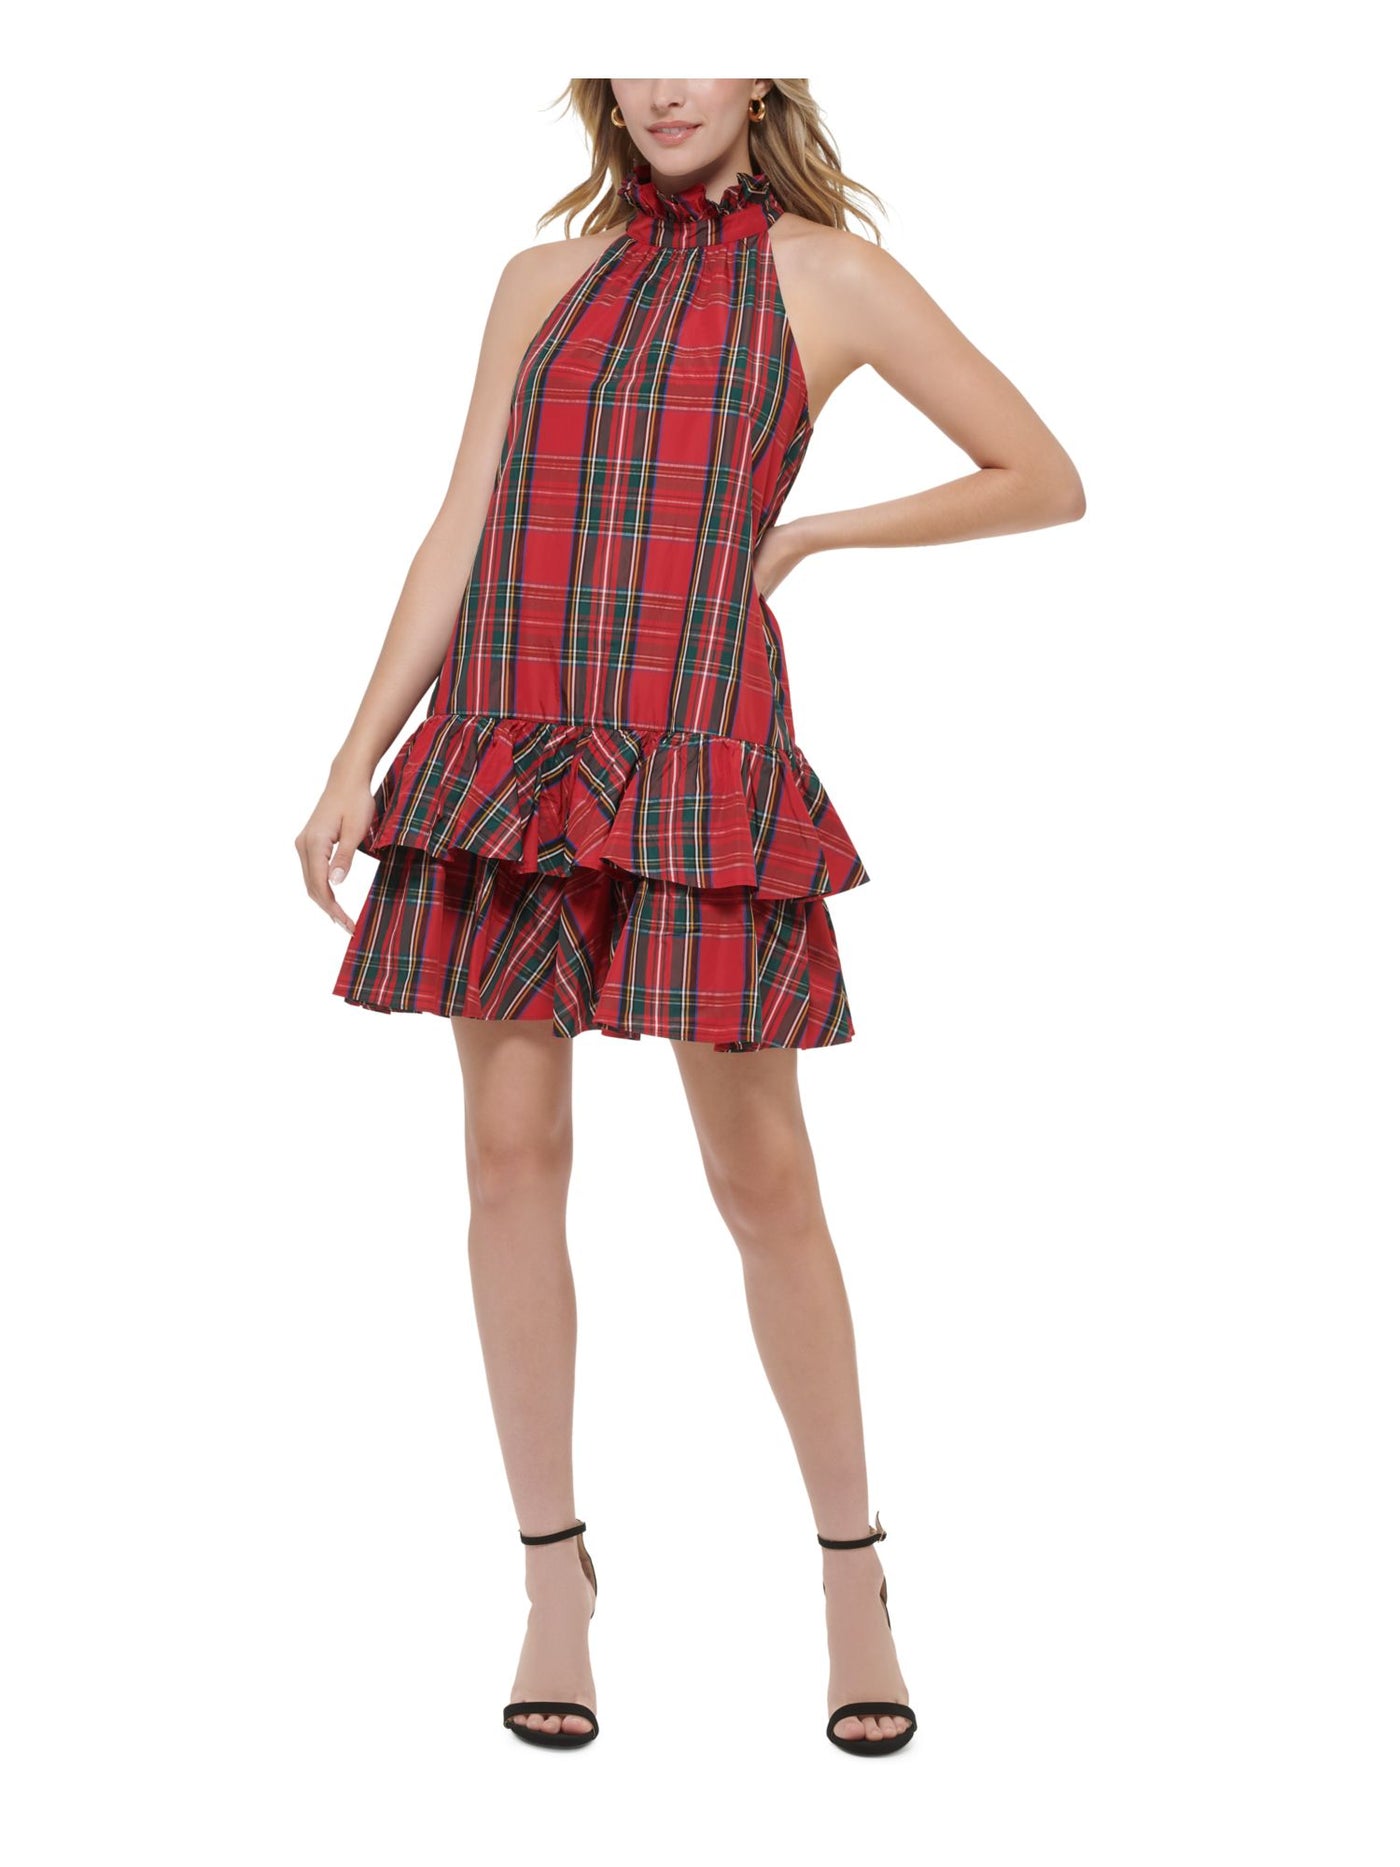 TOMMY HILFIGER Womens Red Zippered Plaid Sleeveless Halter Above The Knee Ruffled Dress 8